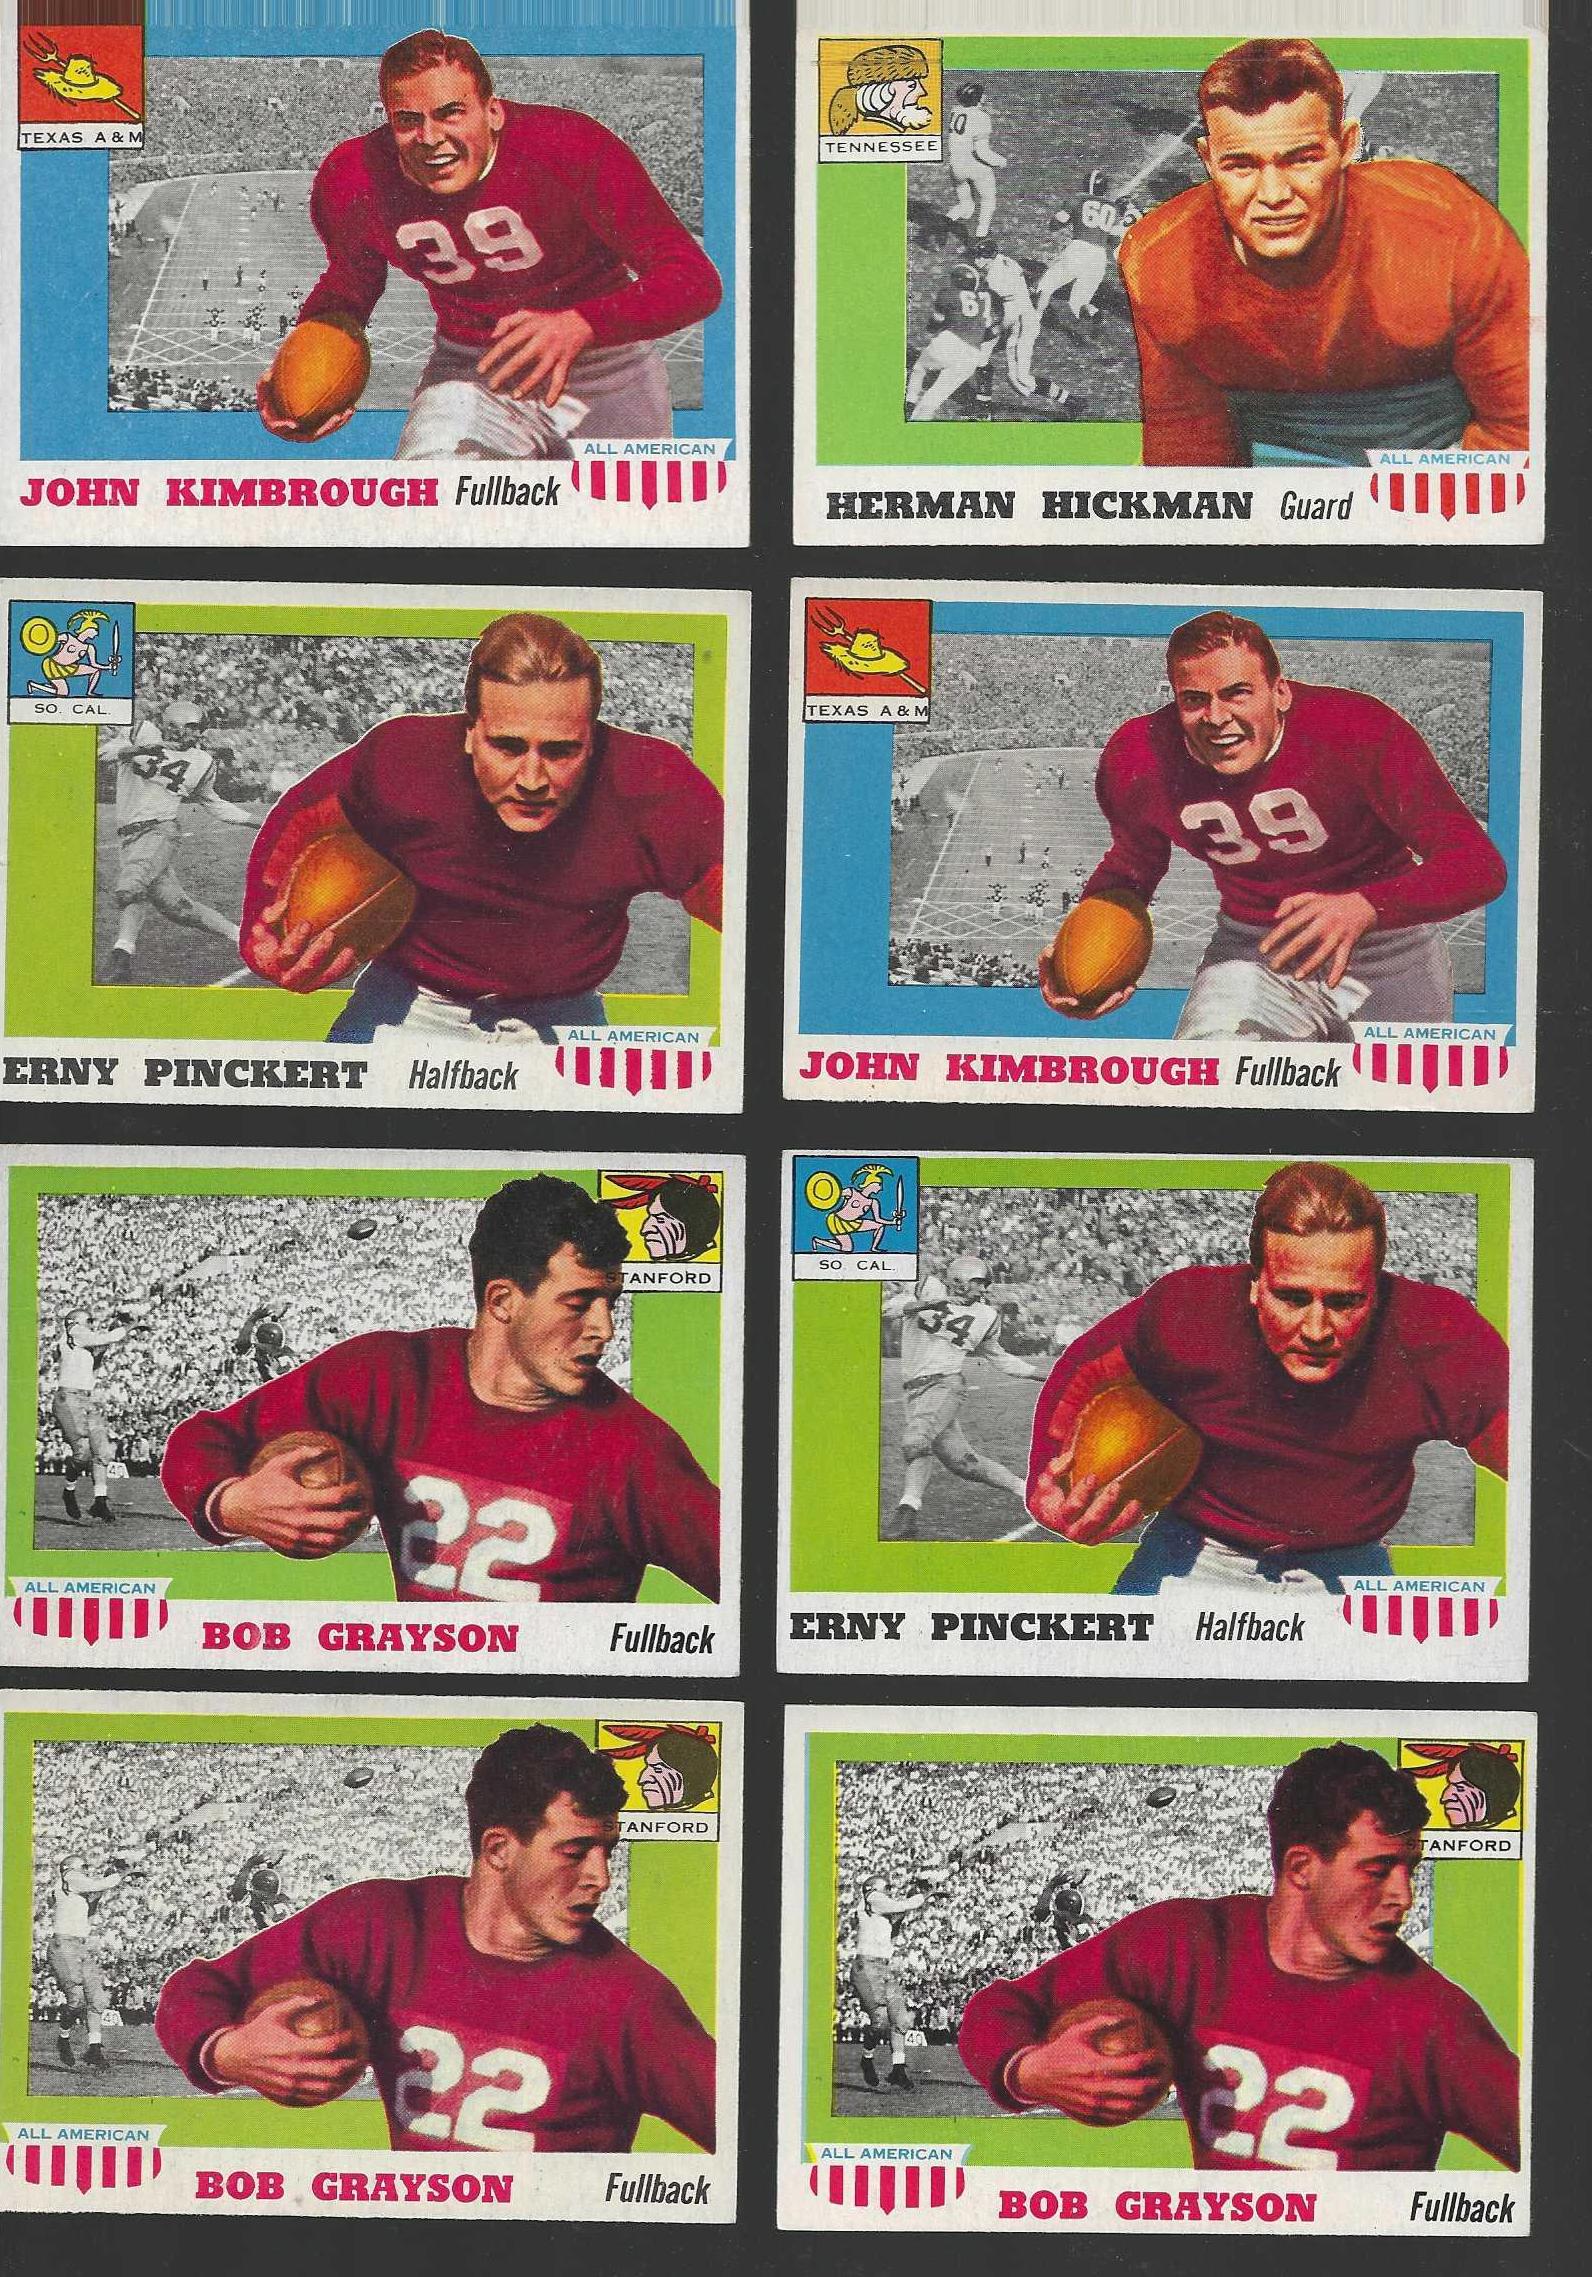 1955 Topps ALL-AMERICAN FB #  1 Herman Hickman ROOKIE (Tennessee) Football cards value